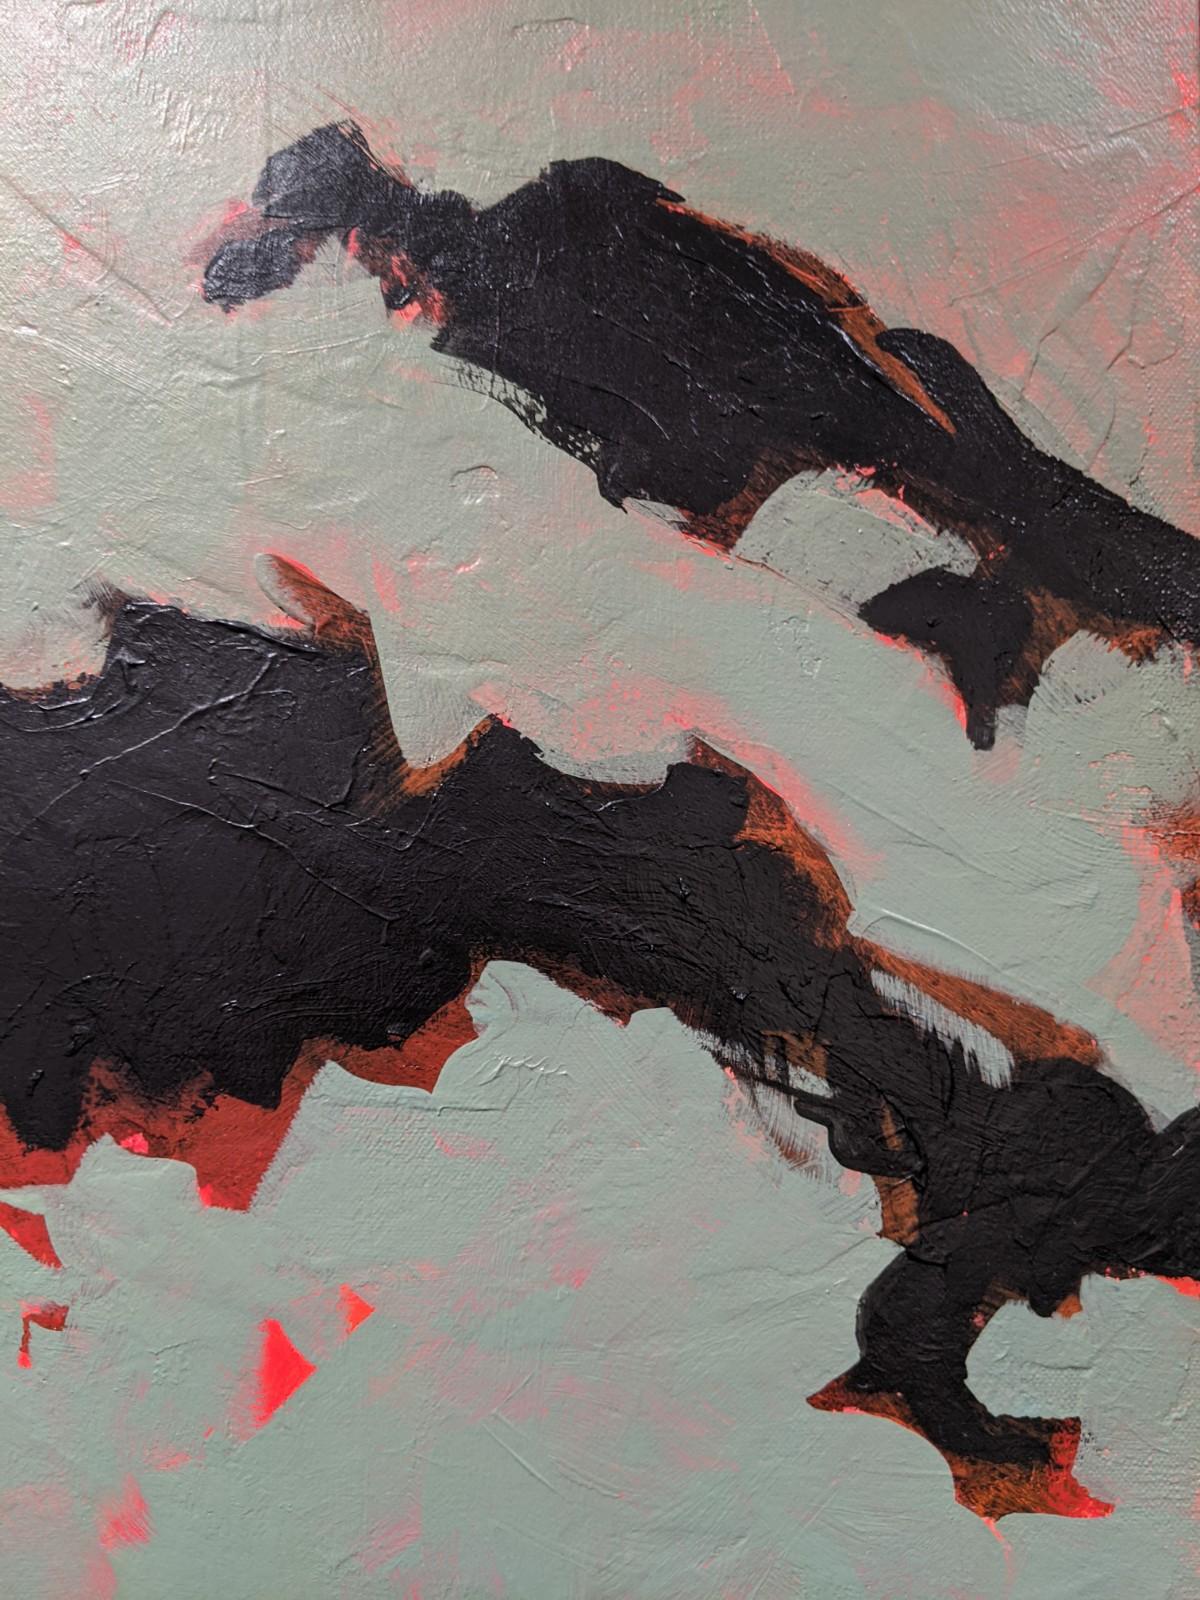 Primal Dance- Abstract Expressionist Painting in Red + Mossy Green + Black - Gray Abstract Painting by Helen Bellaver